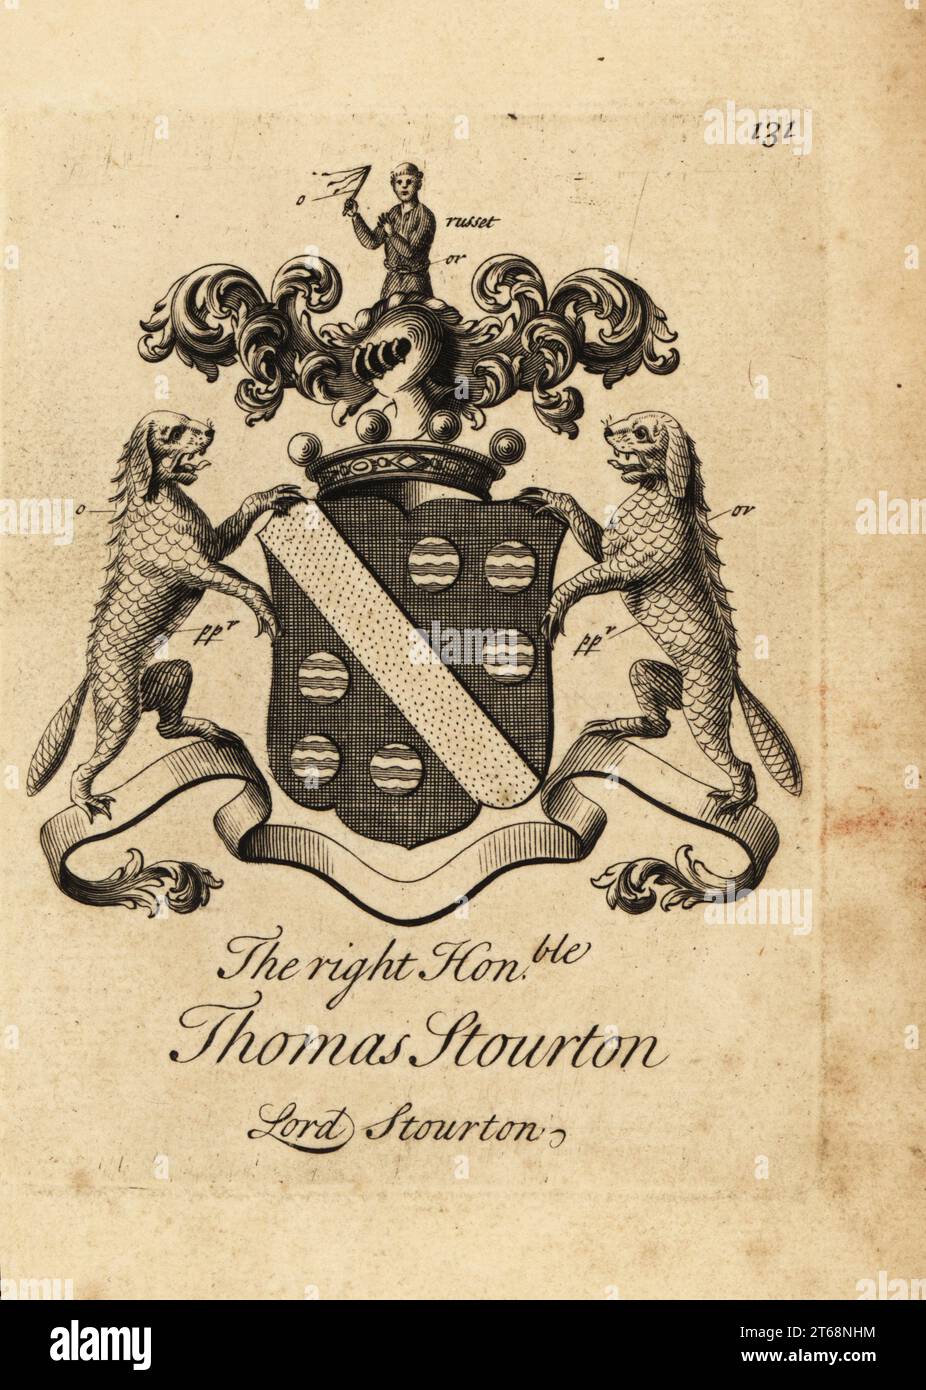 Coat of arms of the Right Honourable Thomas Stourton, 14th Baron Stourton, 16671744. Copperplate engraving by Andrew Johnston after C. Gardiner from Notitia Anglicana, Shewing the Achievements of all the English Nobility, Andrew Johnson, the Strand, London, 1724. Stock Photo